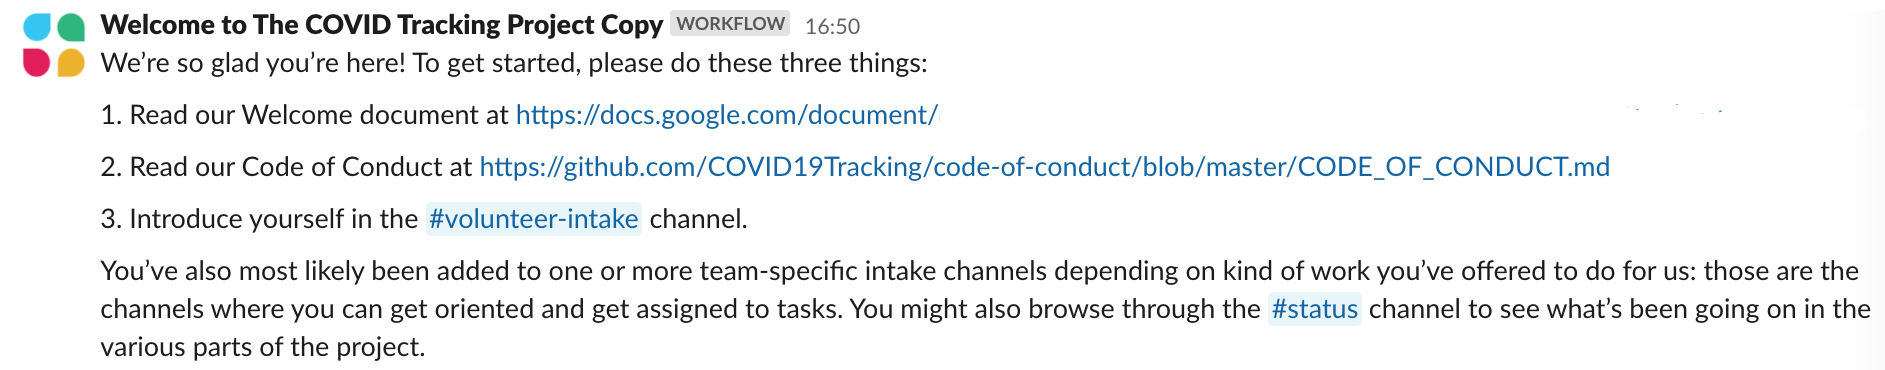 Screenshot of Slack message sent by a workflow welcoming a new volunteer and asking them to read the Welcome document, read the Code of Conduct, and introduce themselves in the volunteer intake channel.